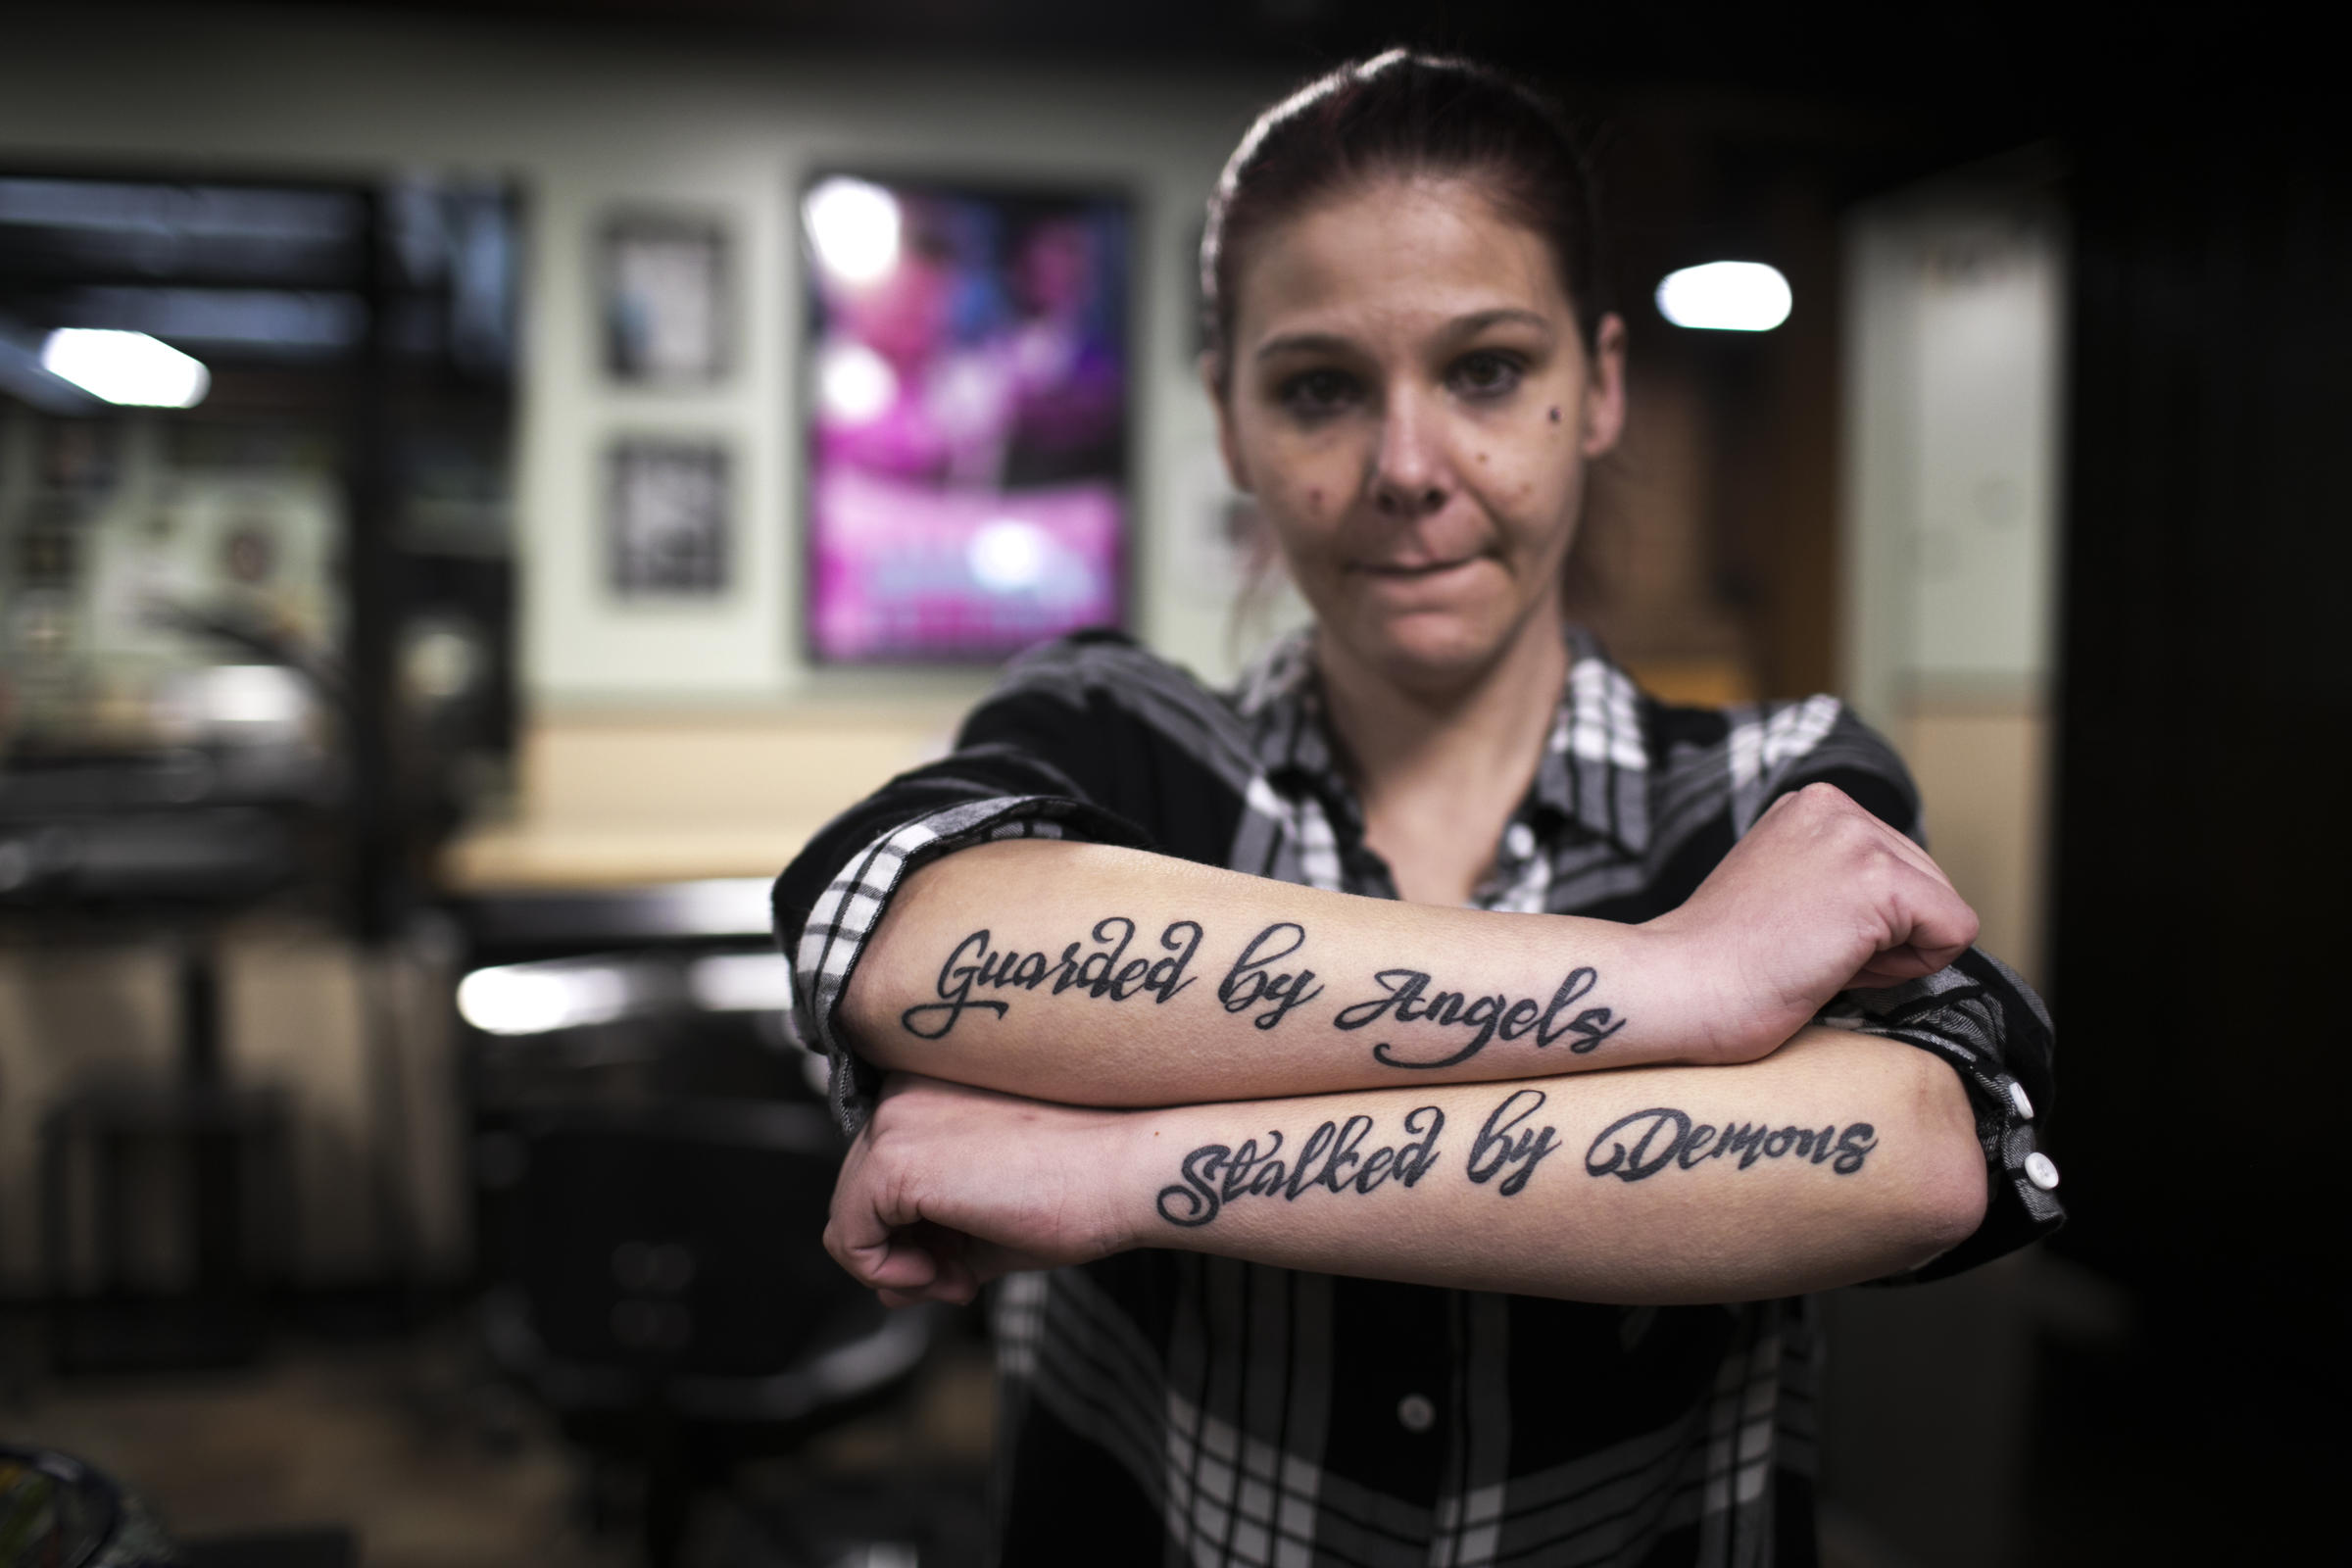 Jenn Glaser shows off her arm tattoos. They say 'guarded by angels, stalked by demons.'